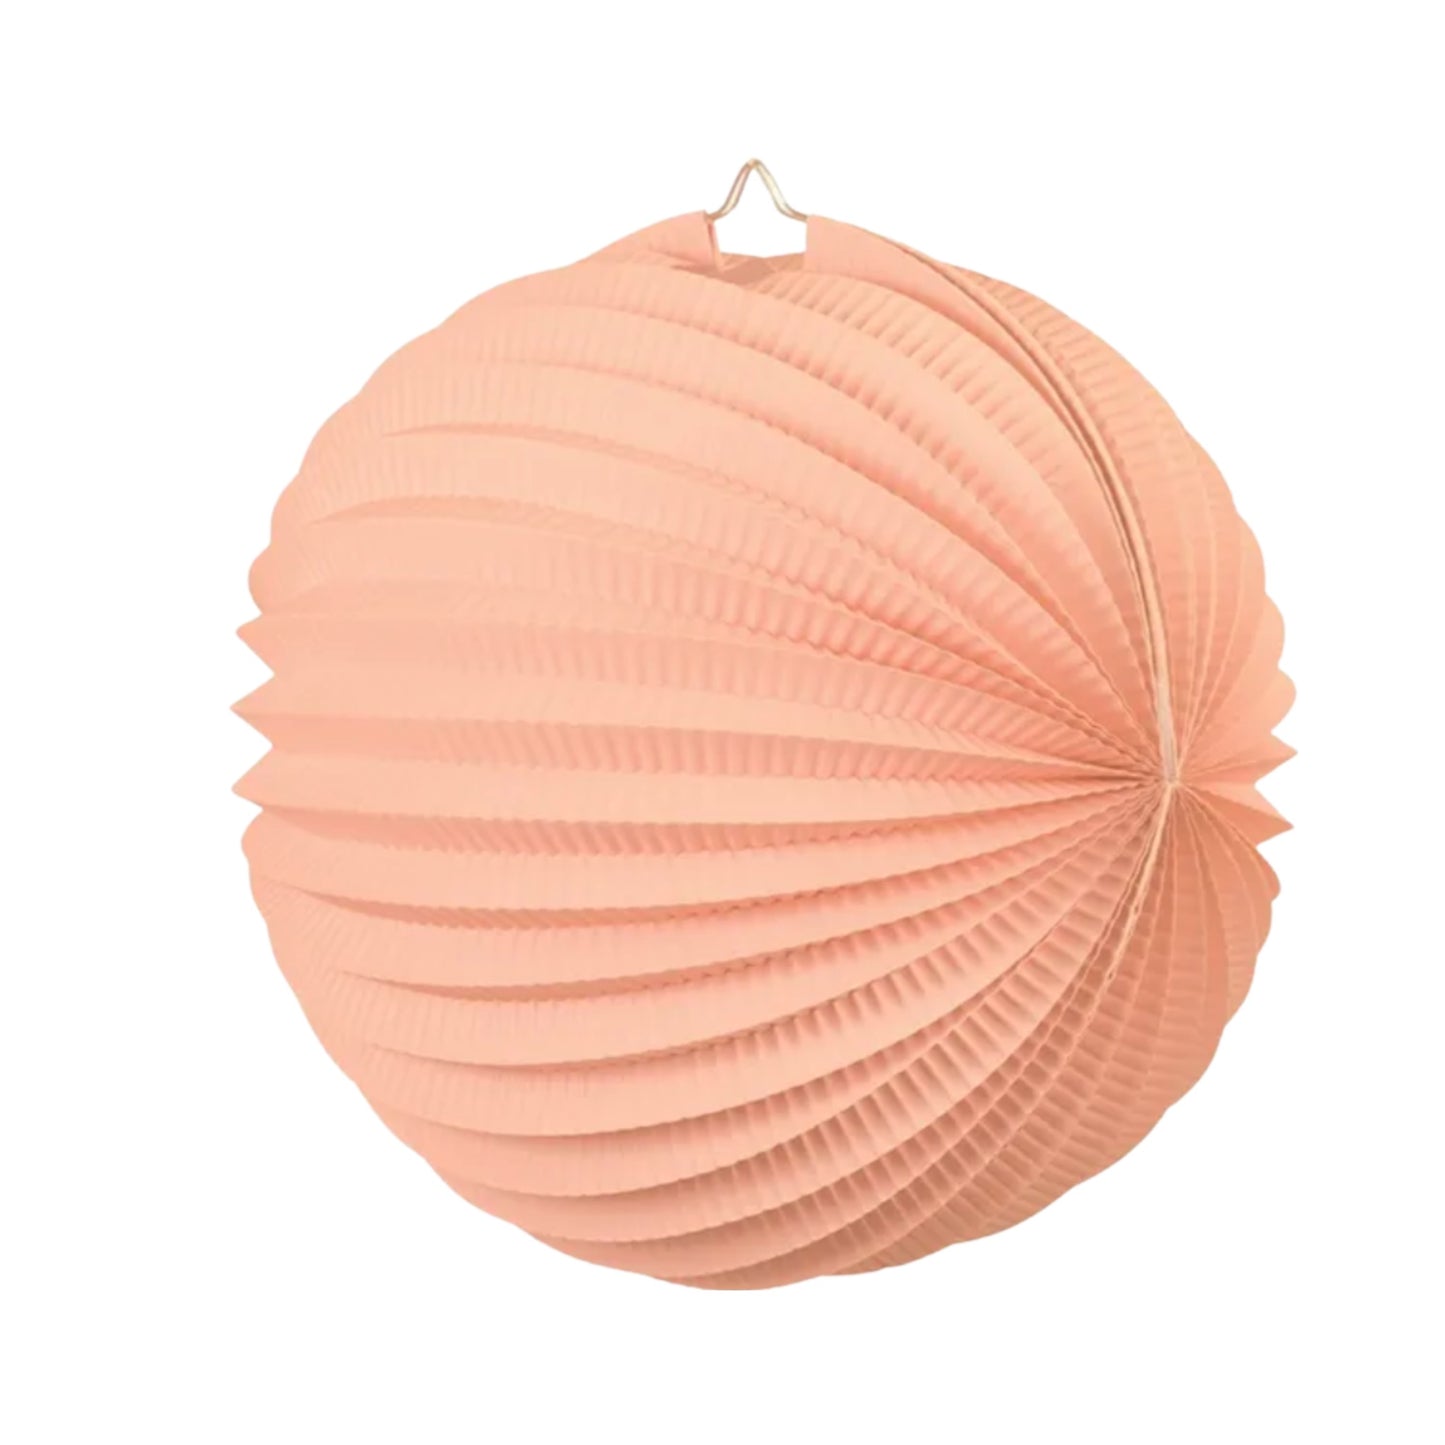 Large accordion style paper lantern in peach